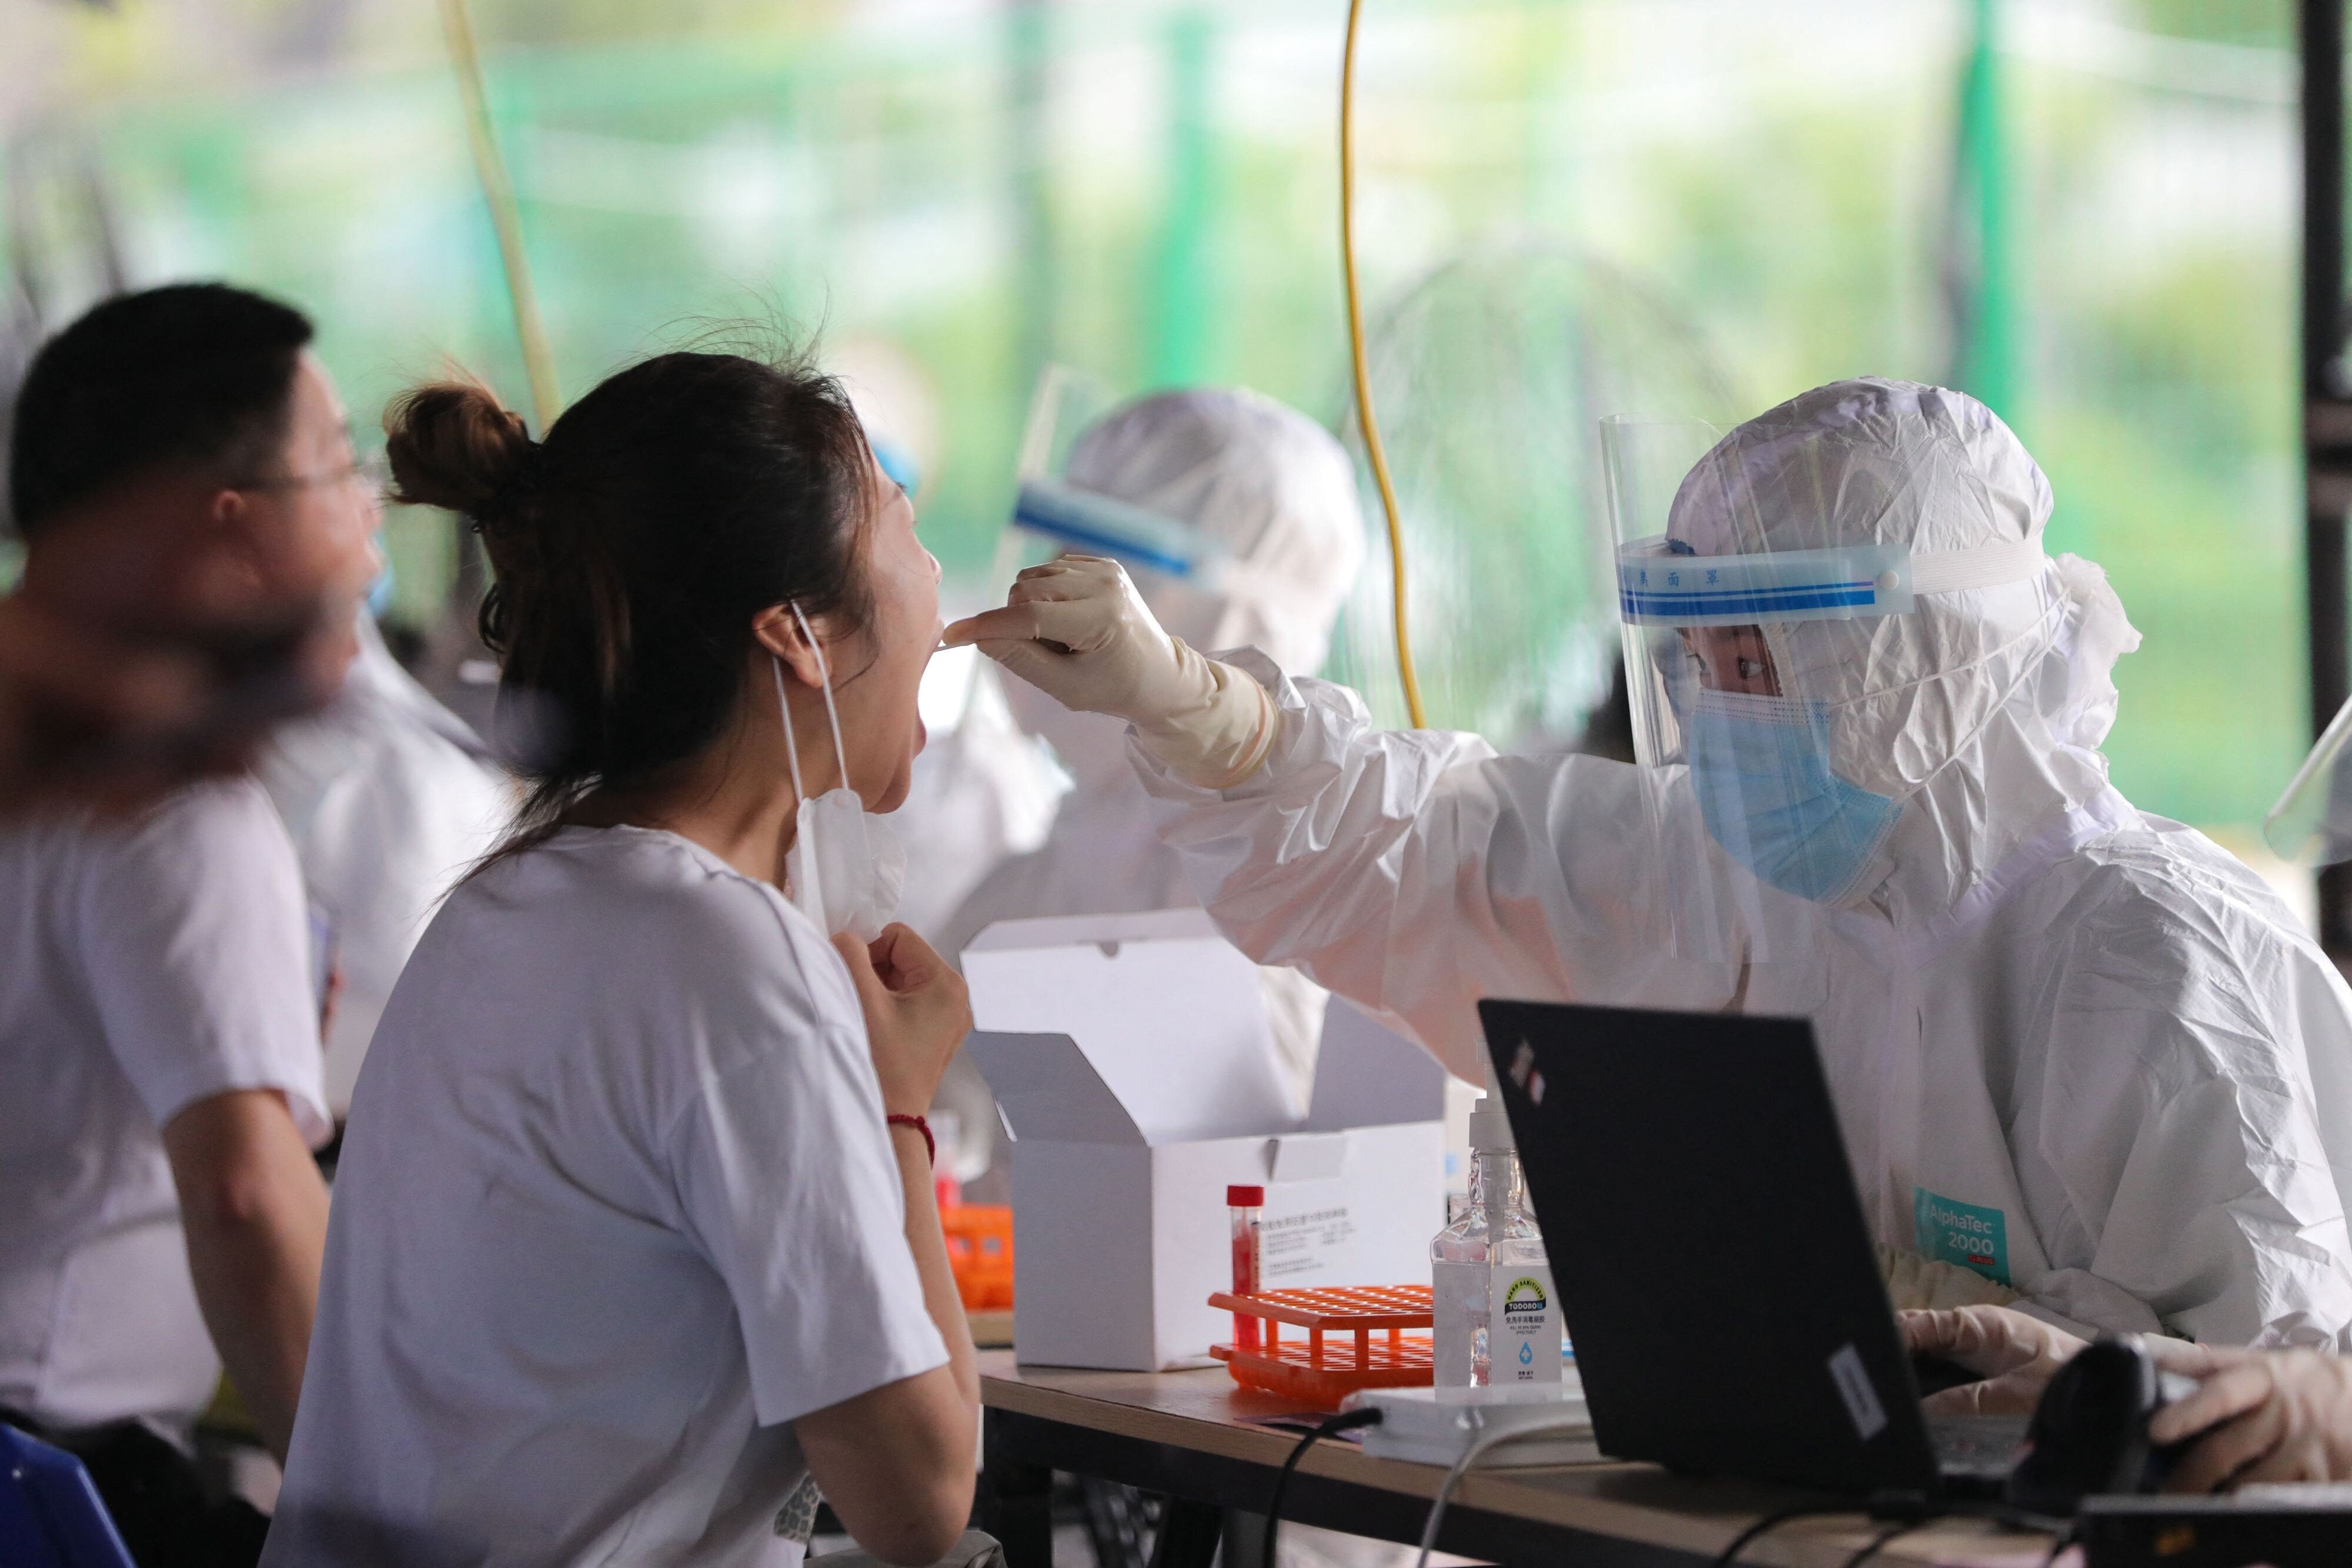 Nucleic acid testing for Covid-19 under way on Saturday in Xiamen, Fujian province. The city reported 39 new locally transmitted cases. Photo: AFP